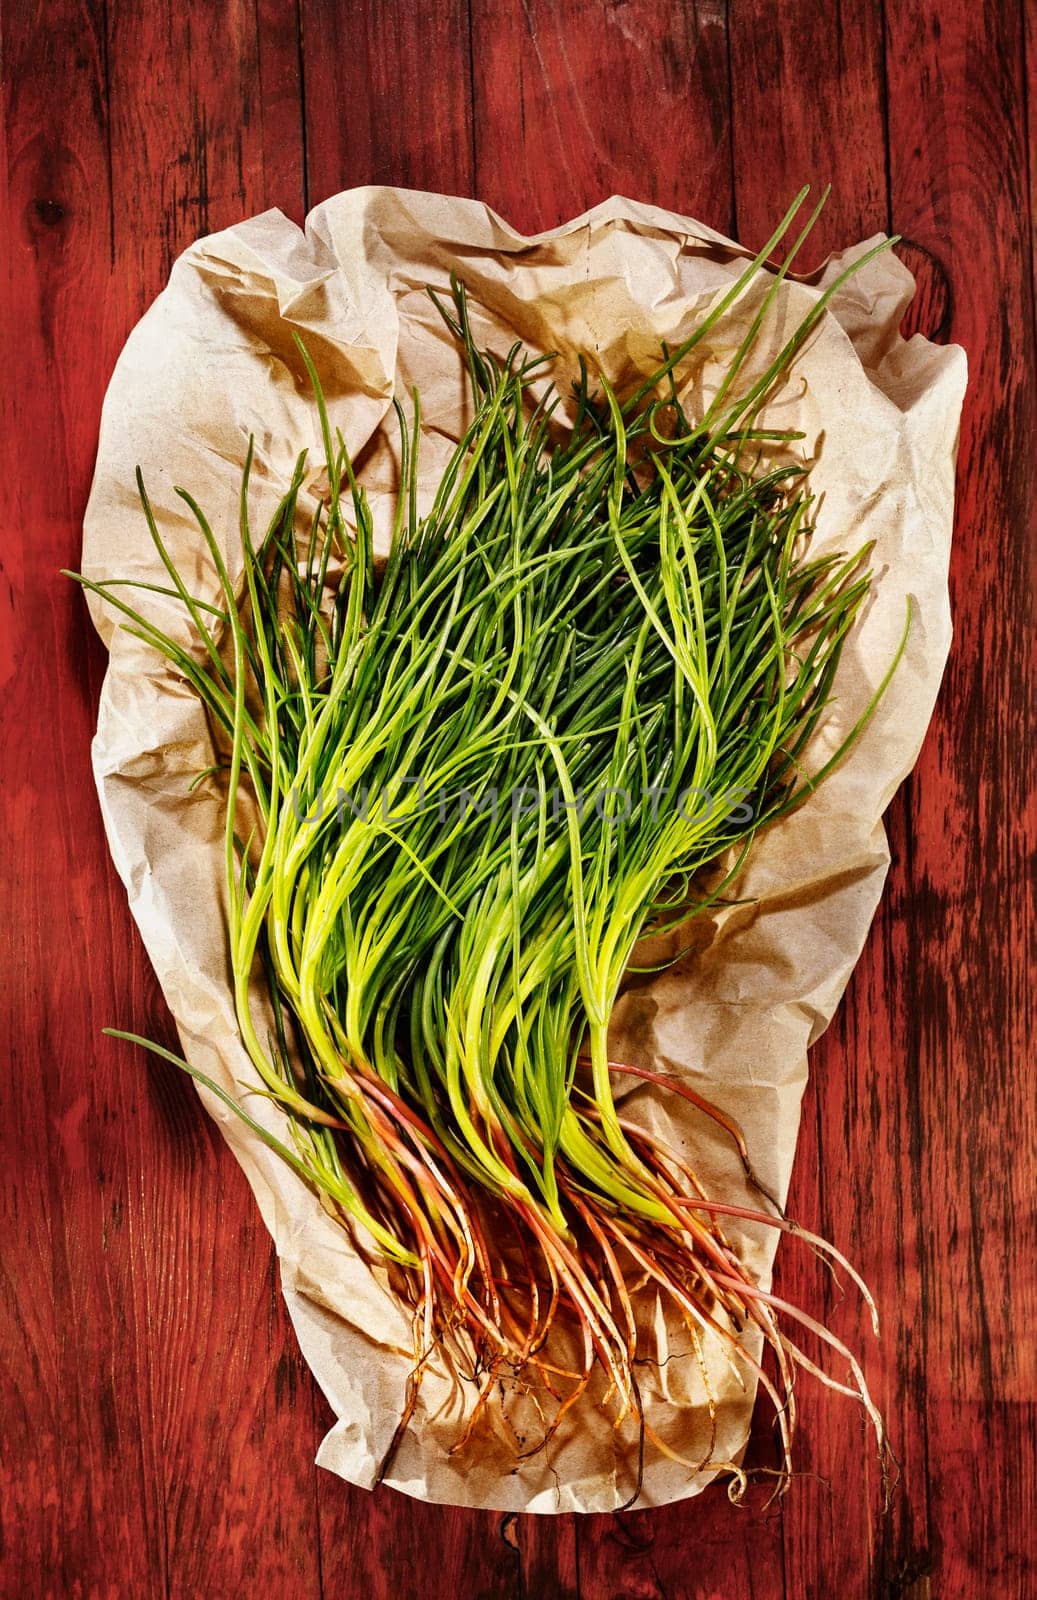 Bunch of agretti -salsola soda or opposite -leaved saltwort -on red wooden table ,fresh uncooked green leaves